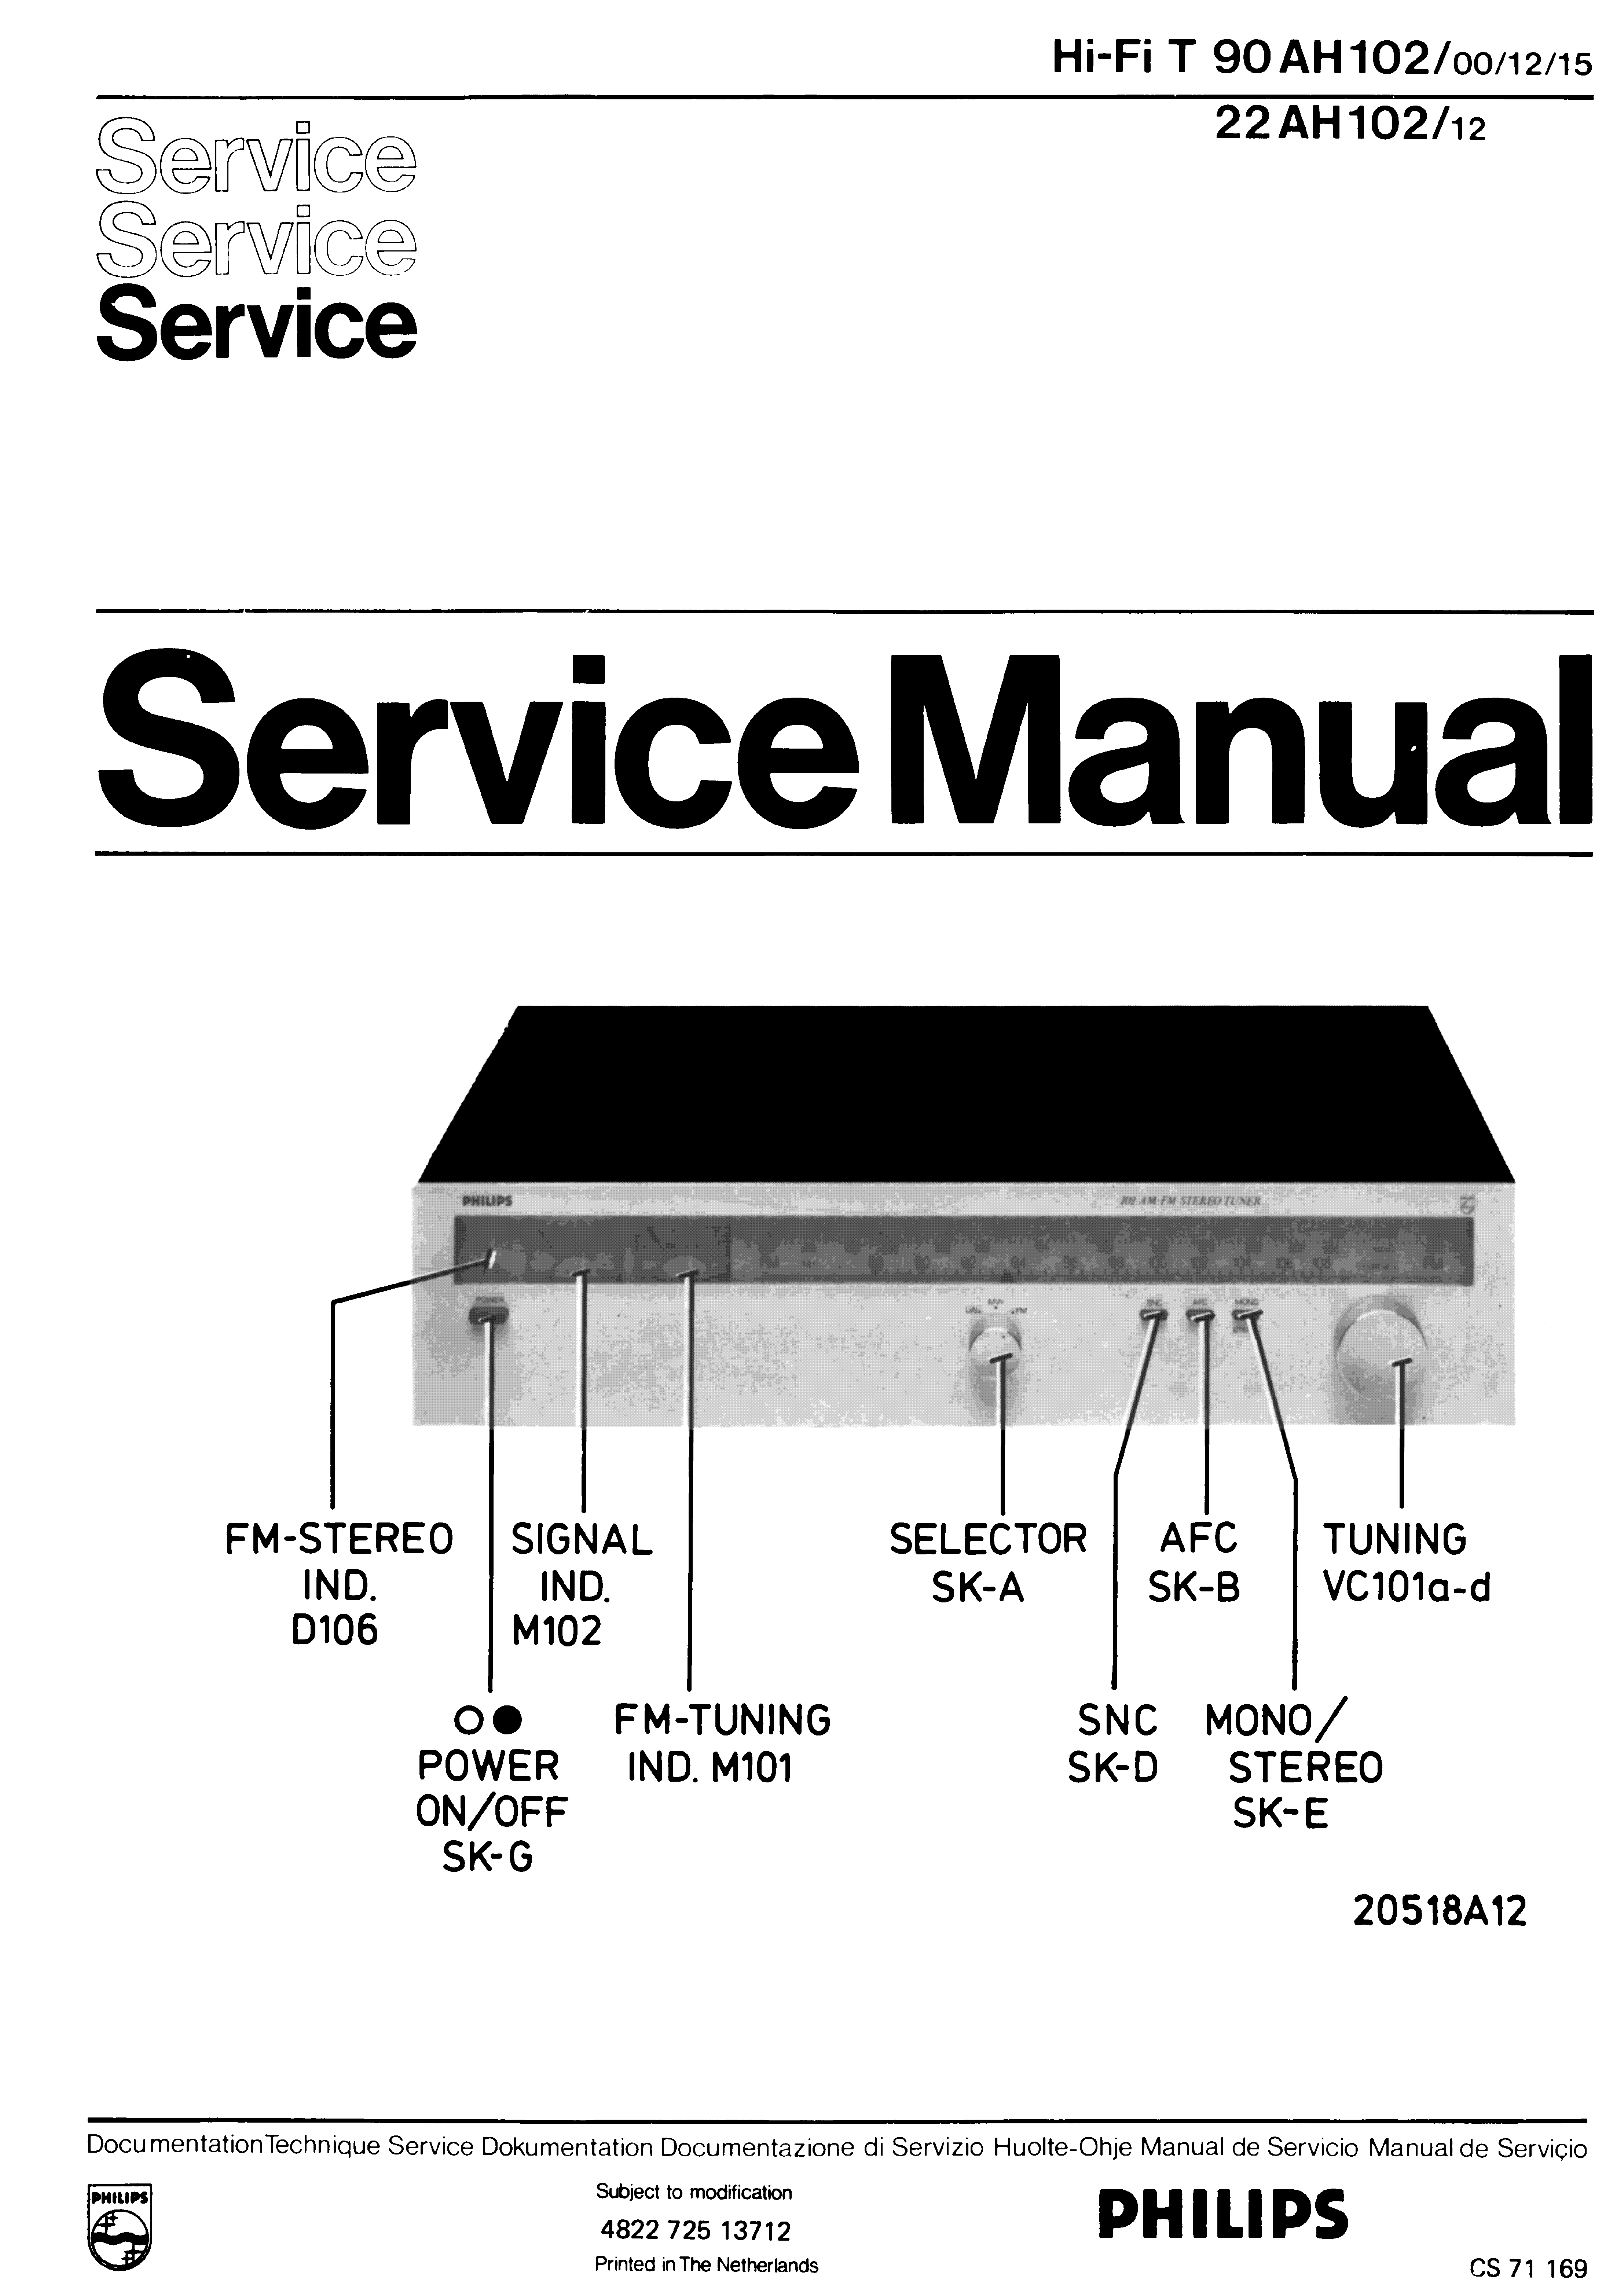 PHILIPS HI-FI TUNER 90AH102 SM service manual (1st page)